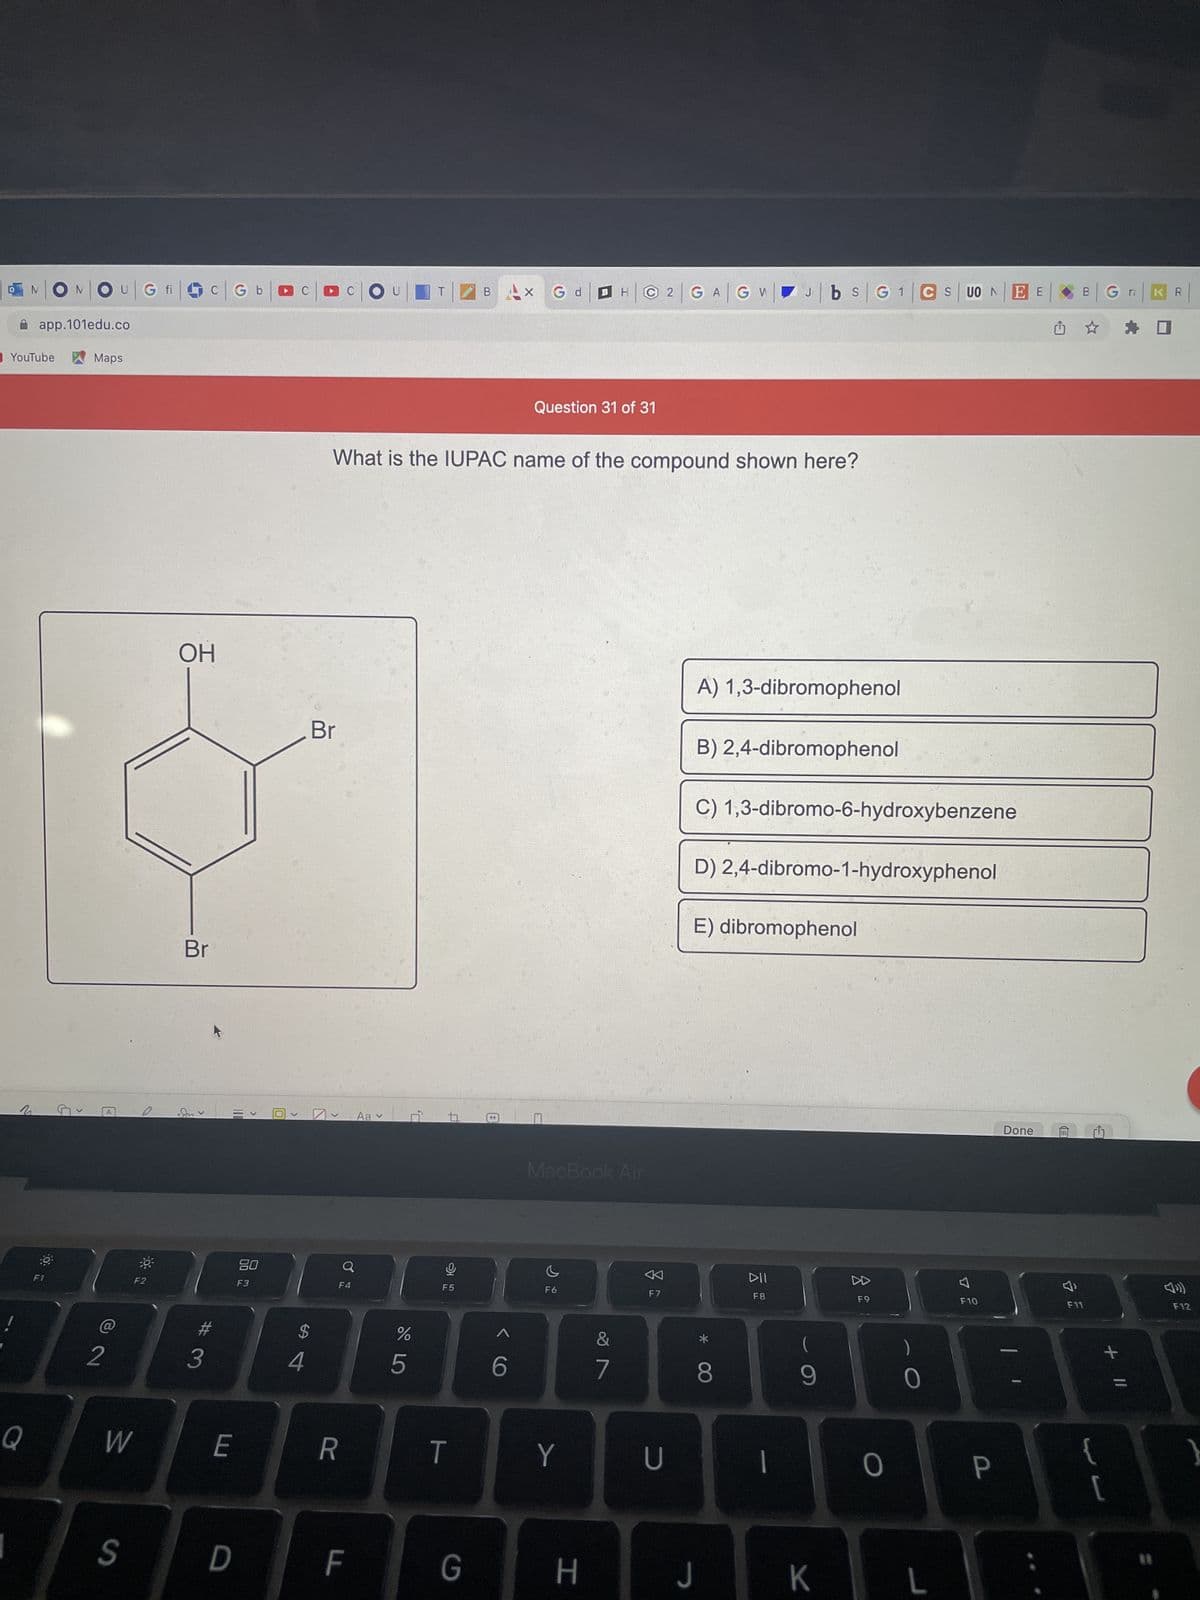 N|ON|O
G fi
app.101edu.co
Maps
YouTube
Q
O
F1
G
<
2
A
W
S
-8-
OH
Br
#
3
G
110
80
F3
E
D
O
$
4
Br
F4
x G d B
GW
Question 31 of 31
What is the IUPAC name of the compound shown here?
A) 1,3-dibromophenol
B) 2,4-dibromophenol
C) 1,3-dibromo-6-hydroxybenzene
D) 2,4-dibromo-1-hydroxyphenol
E) dibromophenol
R
F
Aa ✓
%
5
9
F5
T
G
99
6
MacBook Air
F6
Y
C2 GA
H
&
7
F7
U
*
8
J
DII
F8
Jbs G 1 CS UO N
I
(
9
K
F9
O
0
L
F10
EE
P
Done
û
B
B Gra
F11
←
F12
:\
+ 11
KR
{
[
}